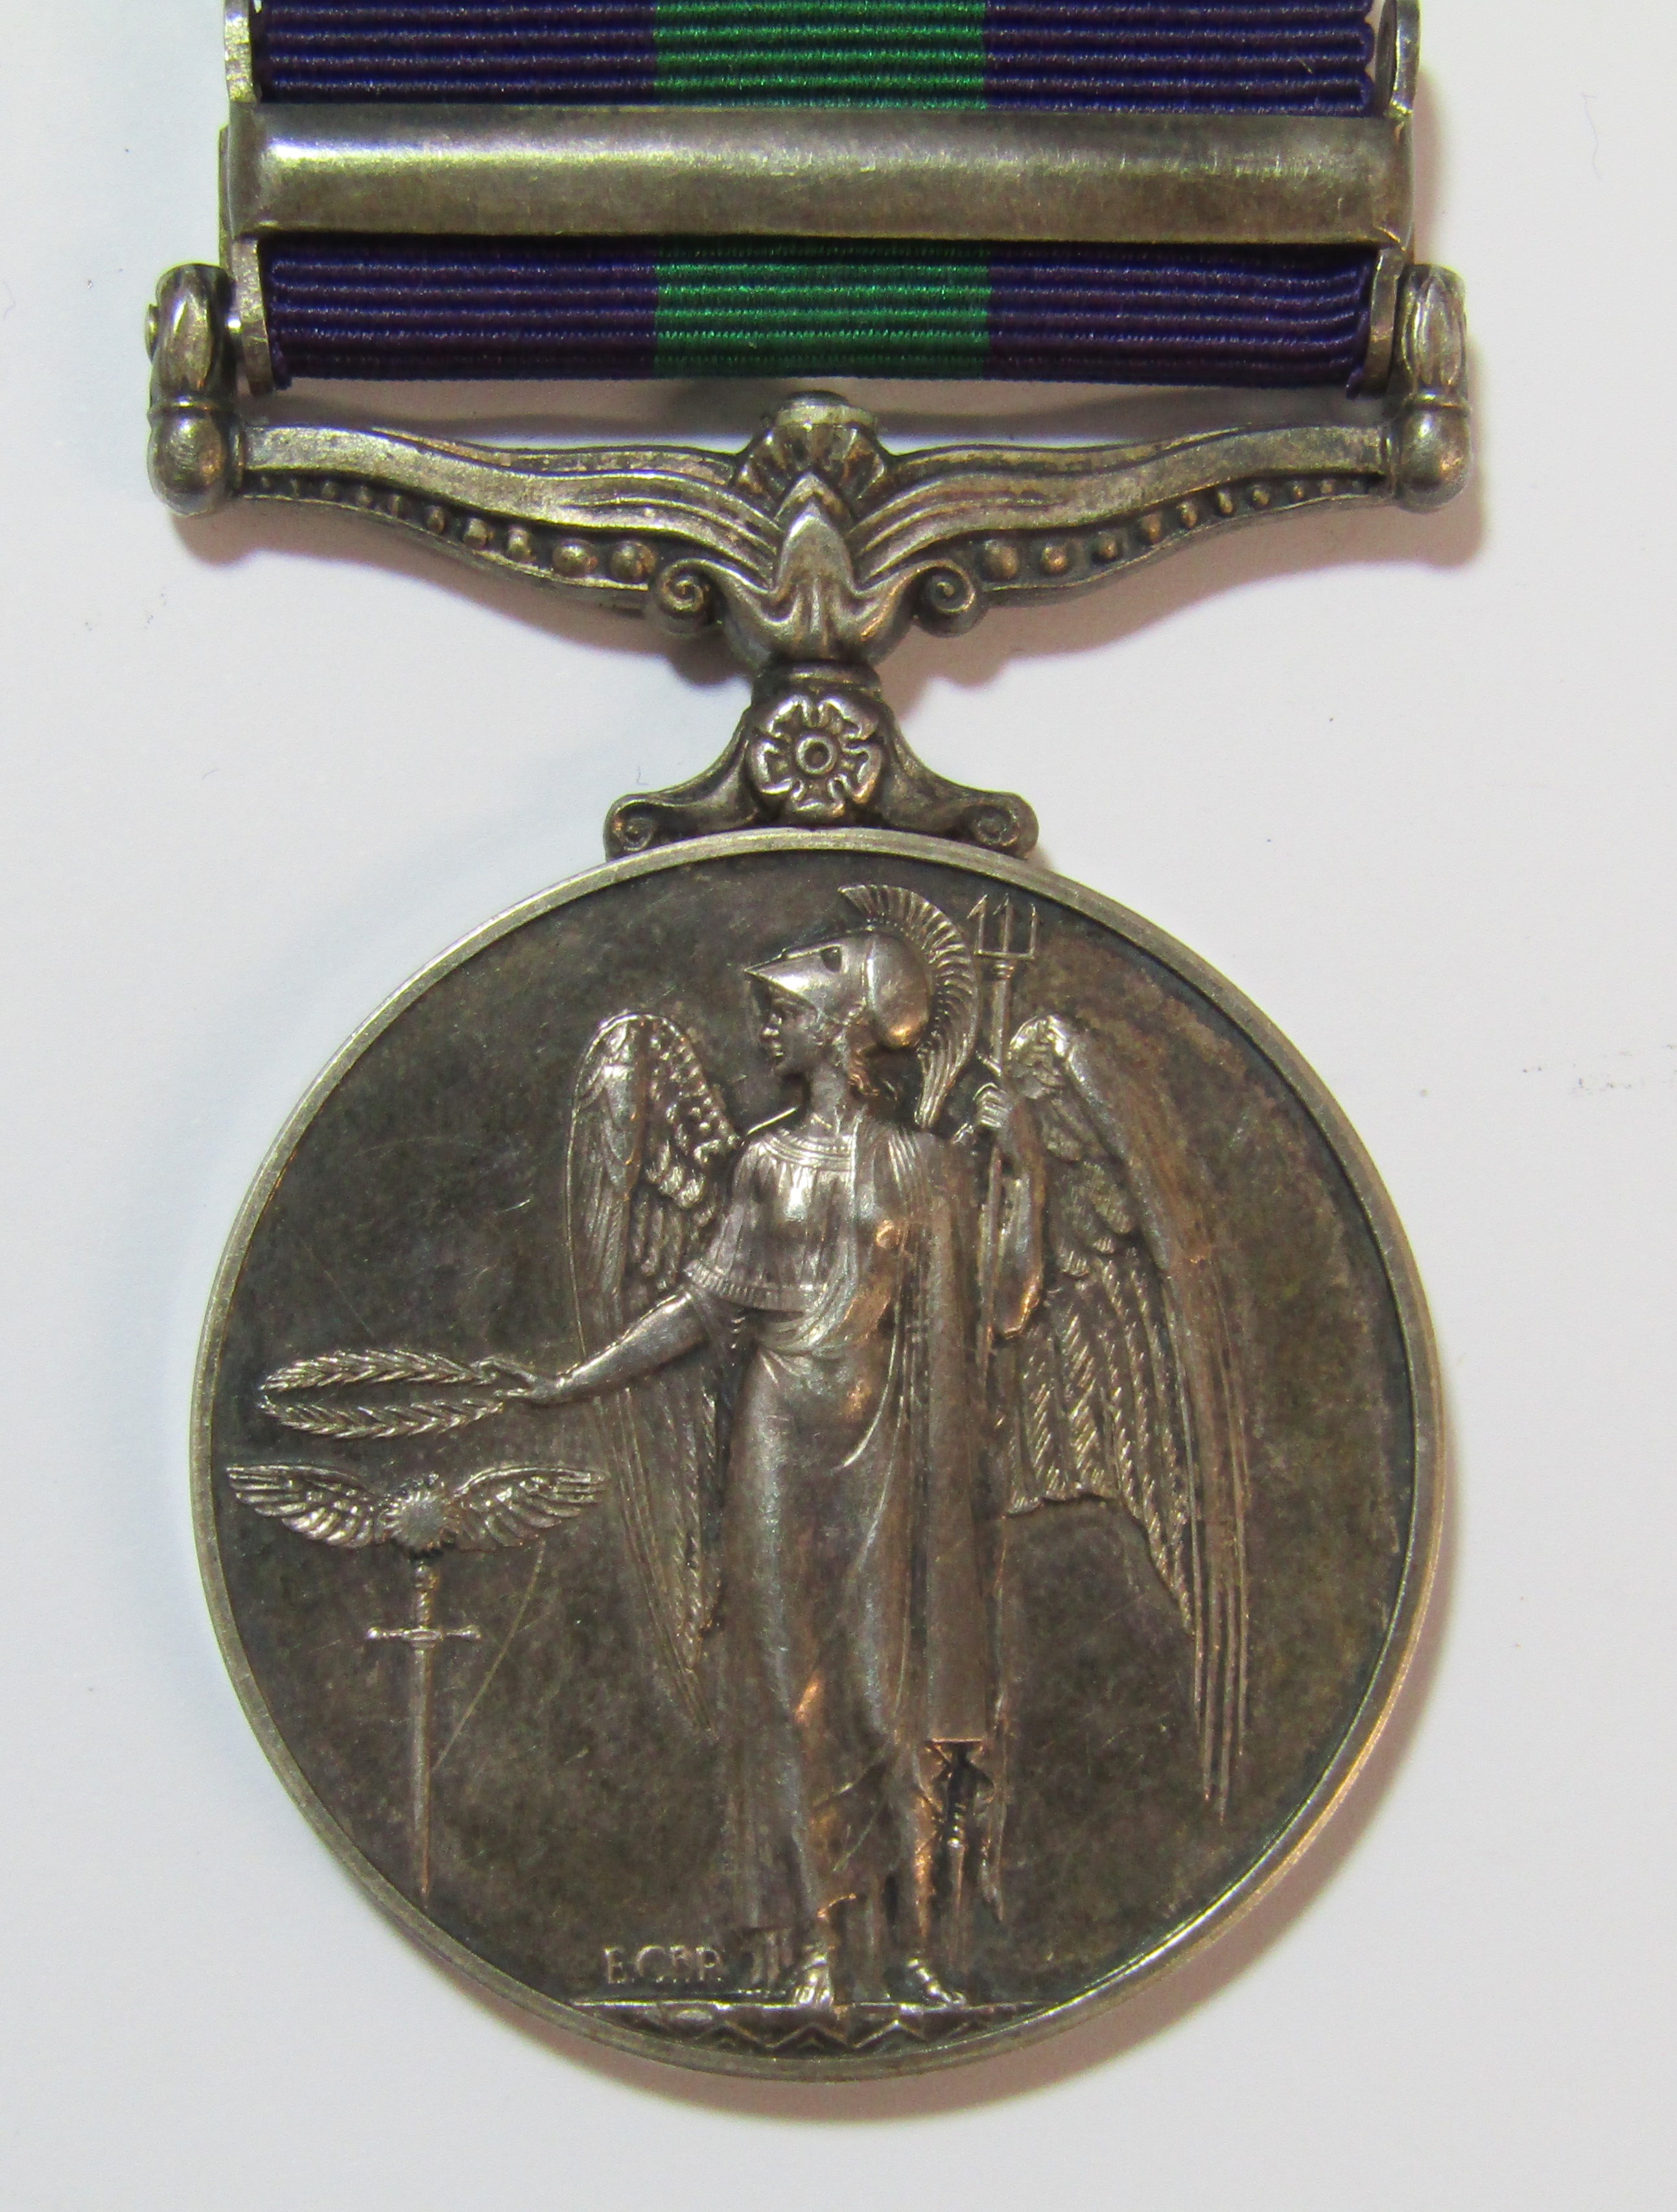 Elizabeth II Cyprus medal - 23424797 PTE D OLSEN A.C.C - with purple and green ribbon - Image 3 of 6